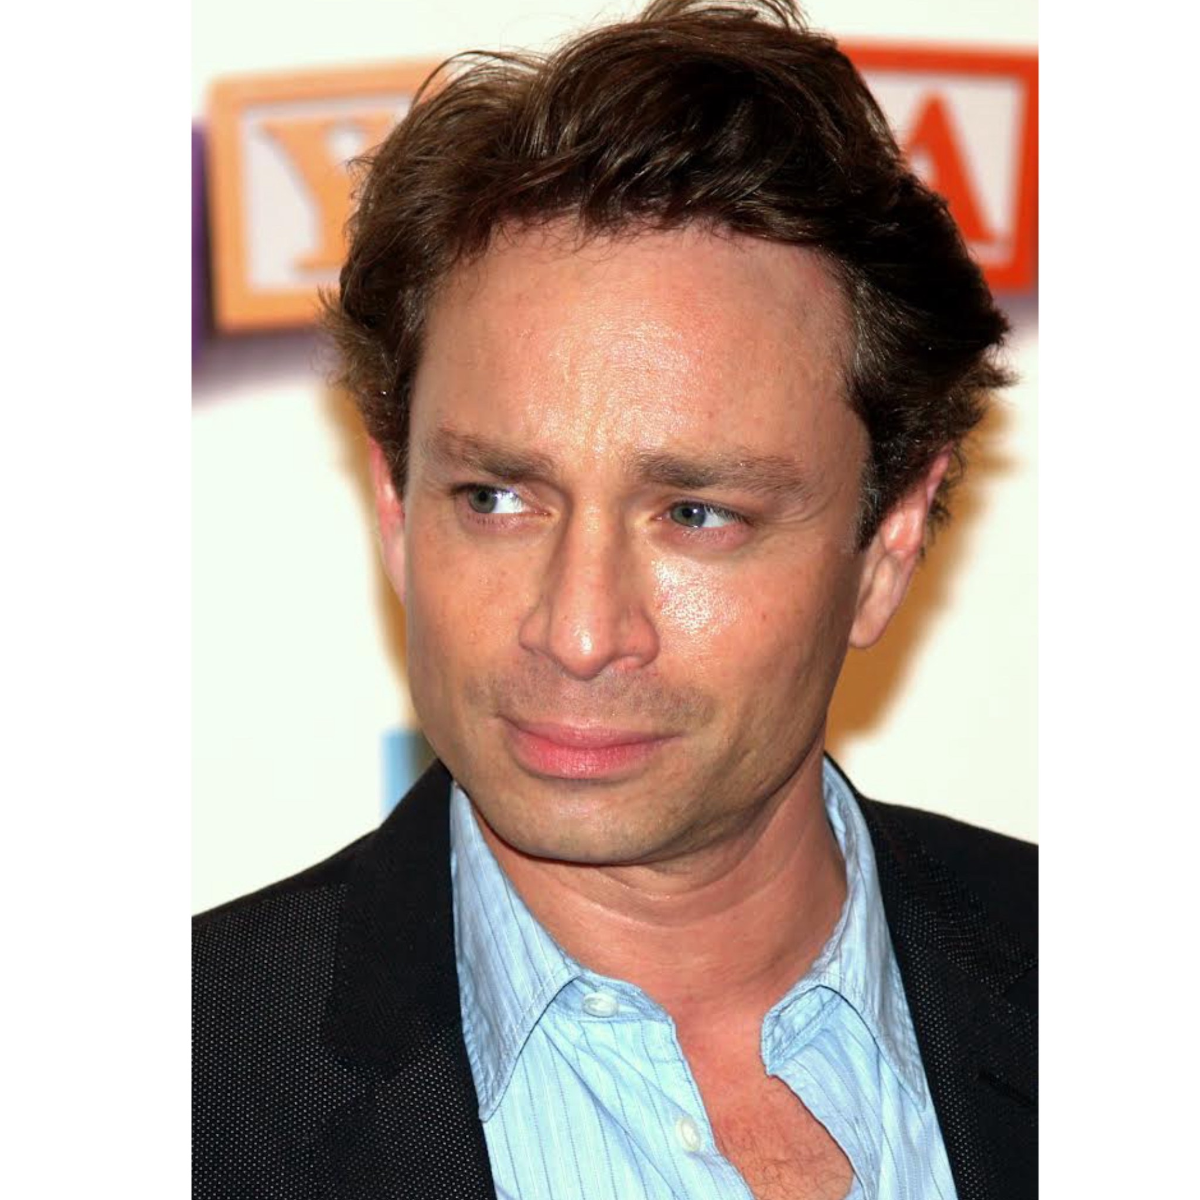 Glory Days Presents! Chris Kattan with Specials guests @ West End Live